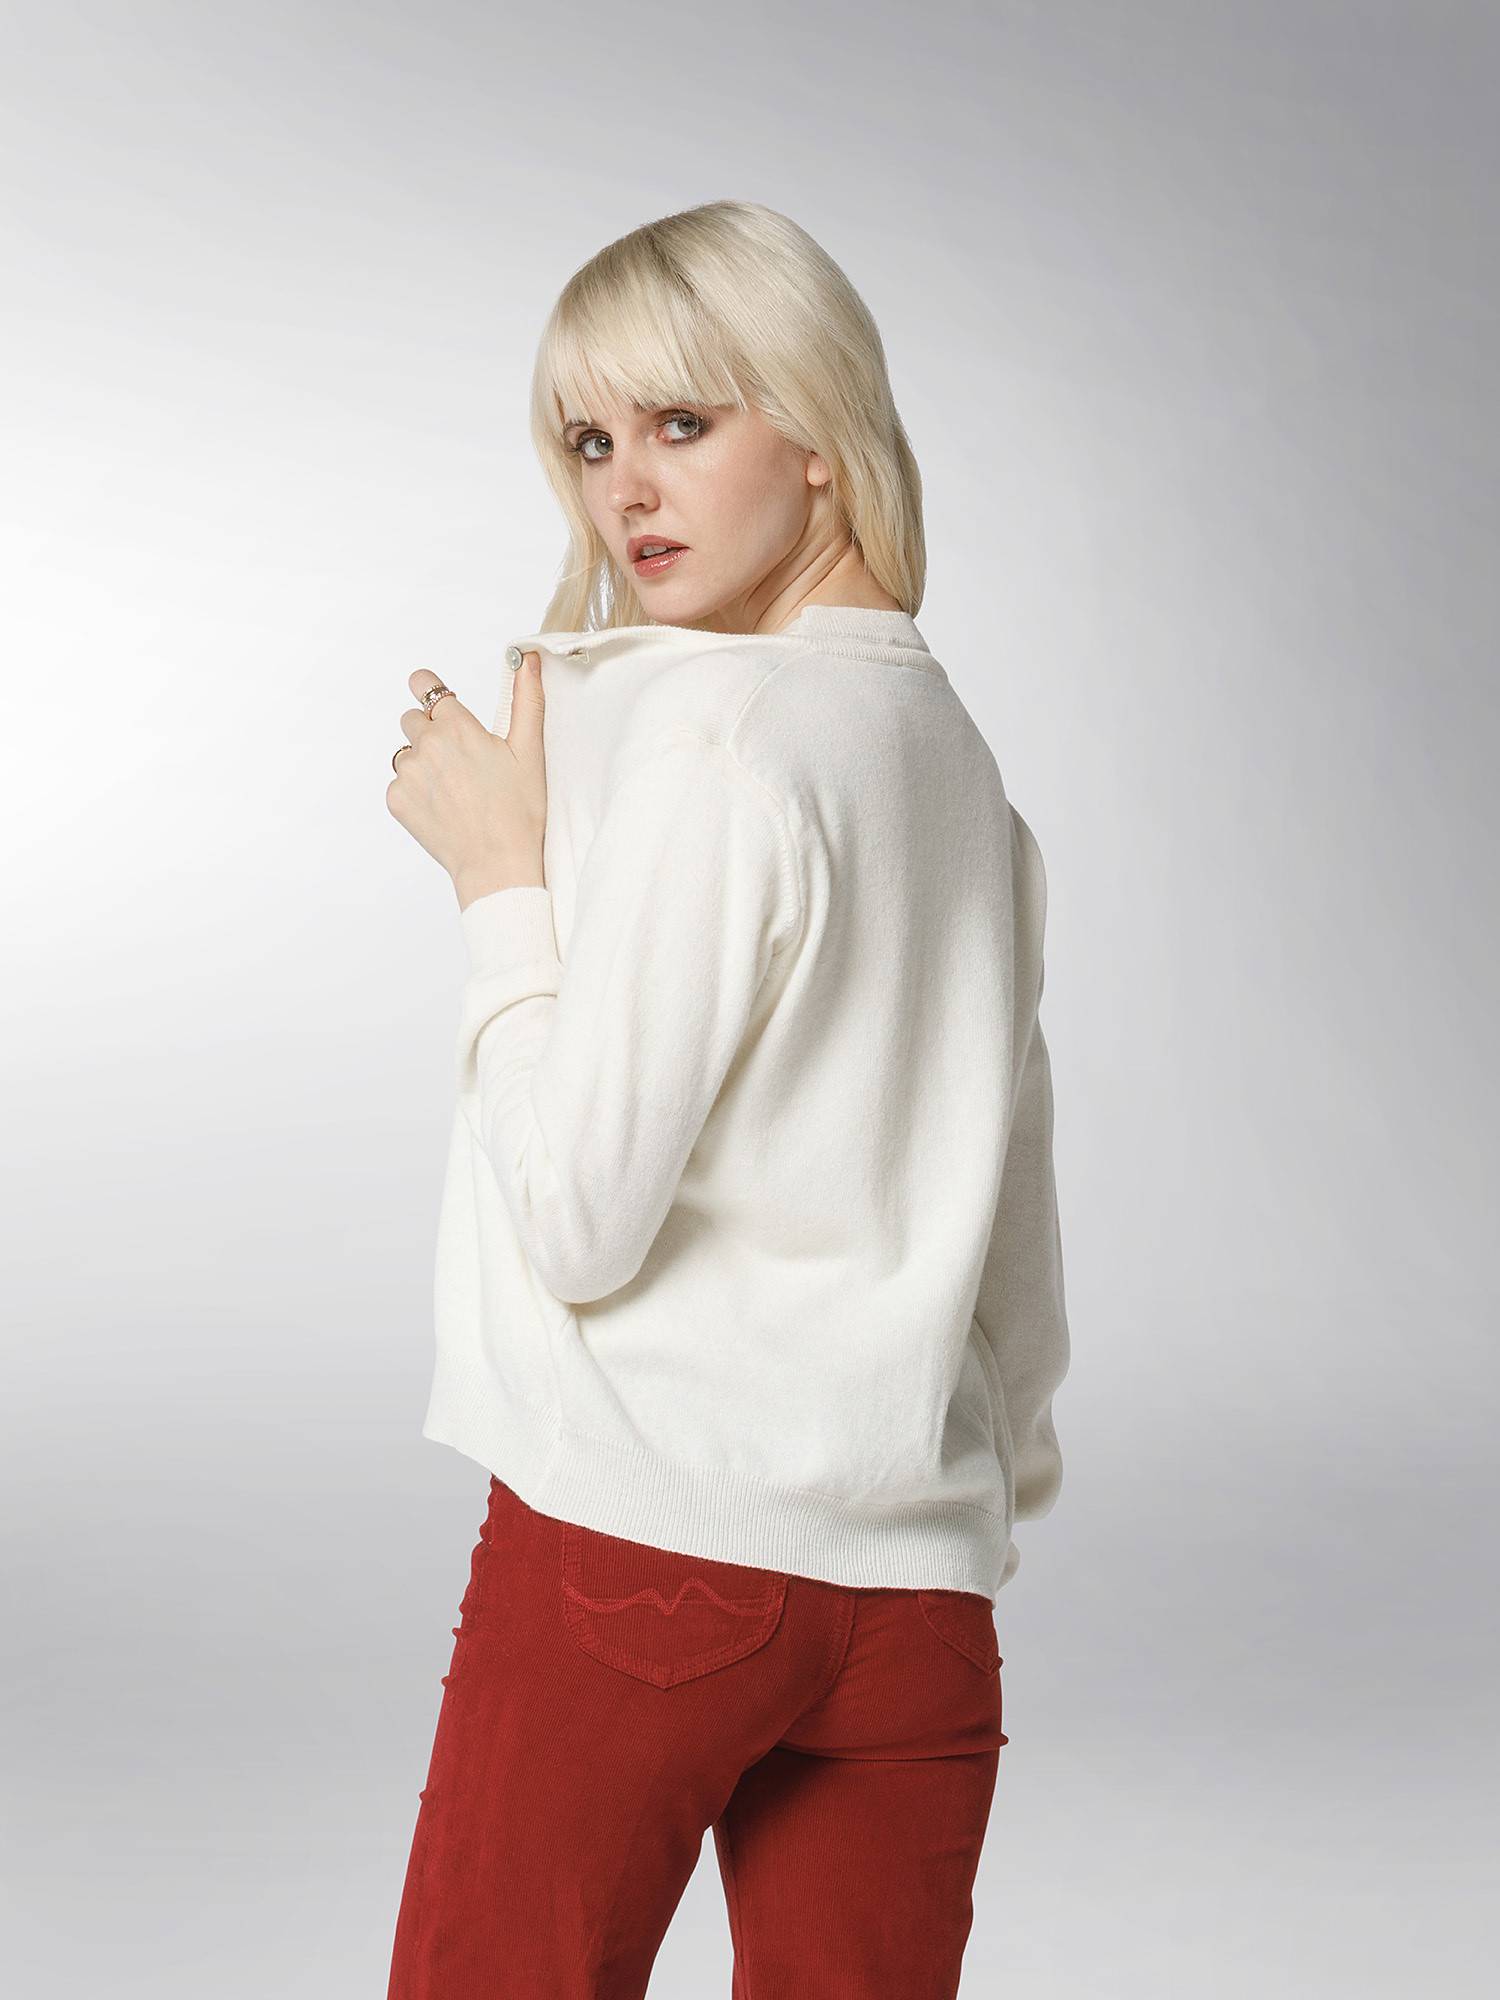 K Collection - Crewneck sweater, White Cream, large image number 5